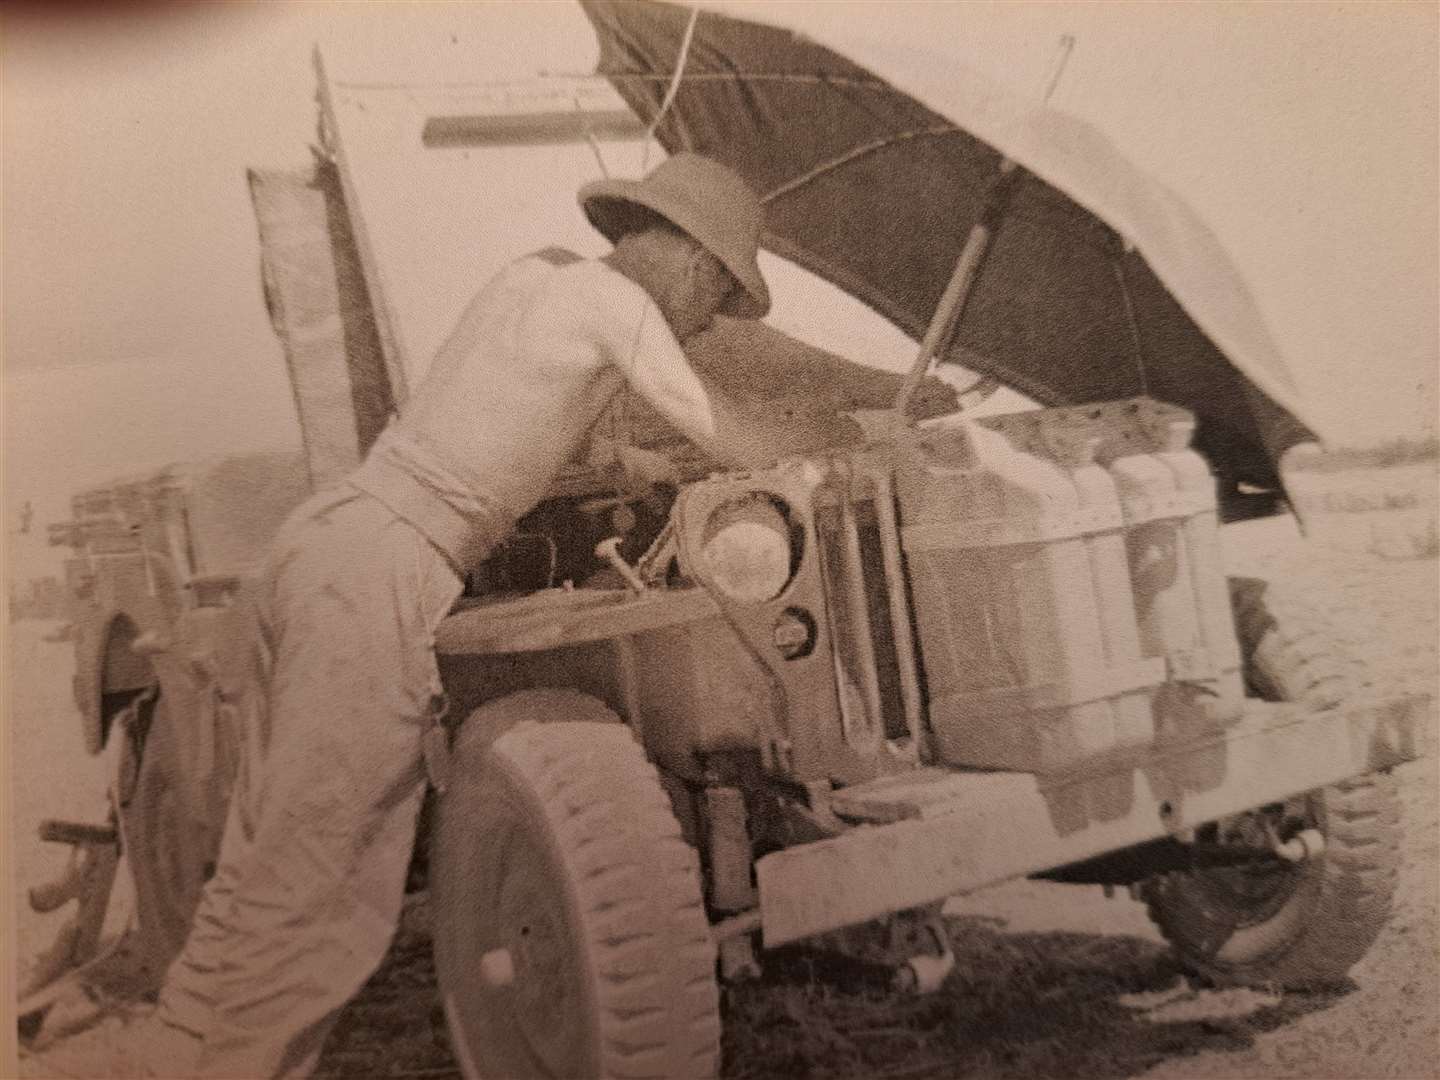 Bill Horn at work on a Willys-Overland Jeep in Persia during the Second World War